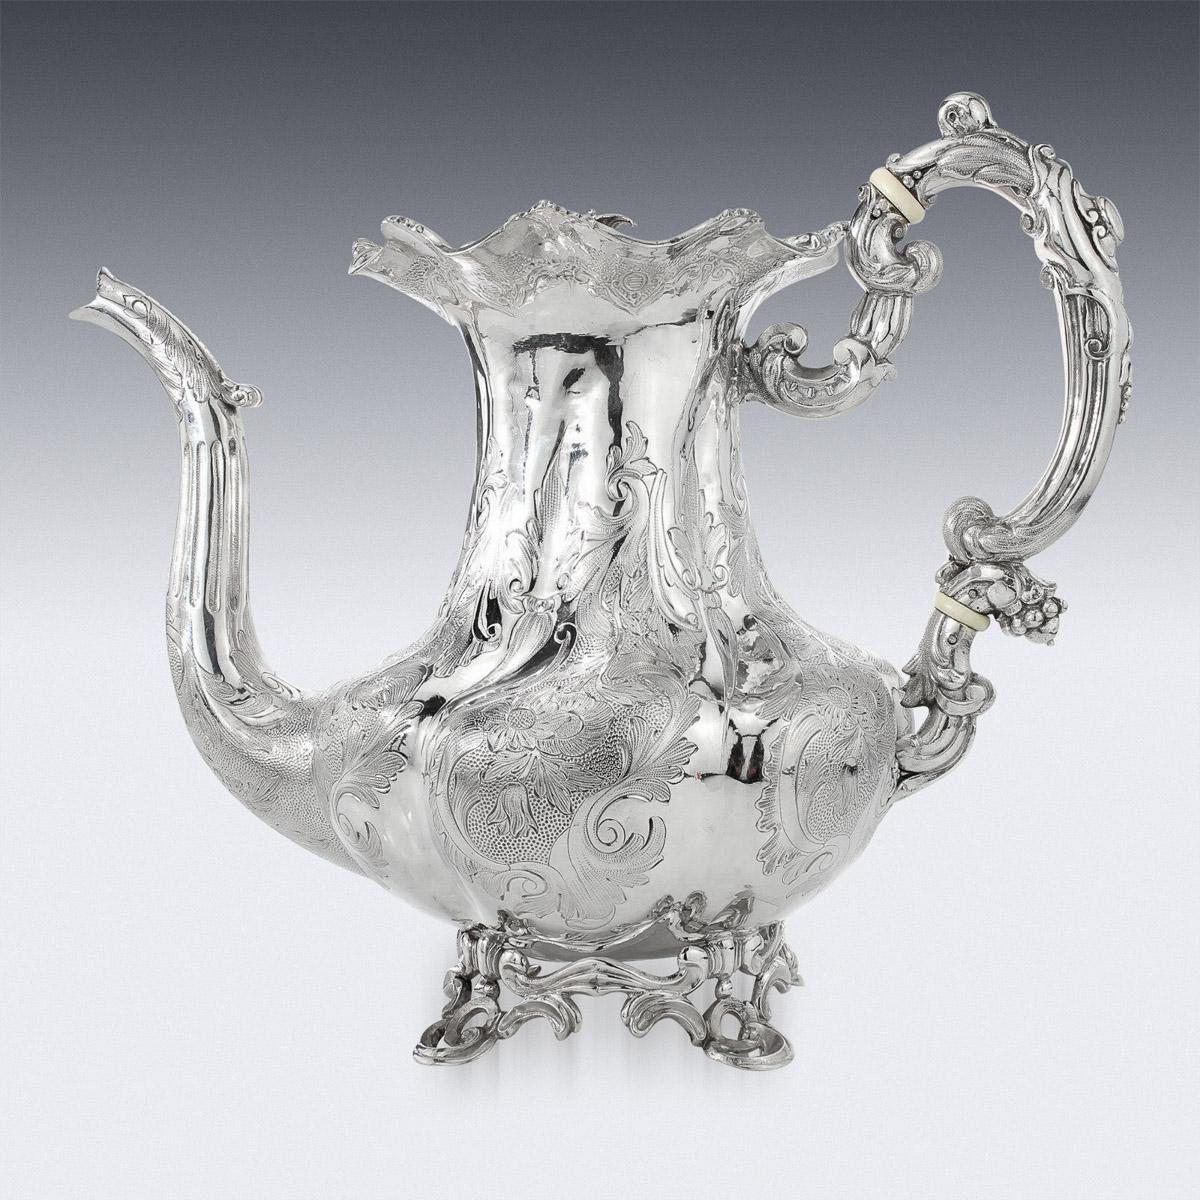 Gilt 19th Century Imperial Russian 5 Piece Solid Silver Tea & Coffee Service, c.1844